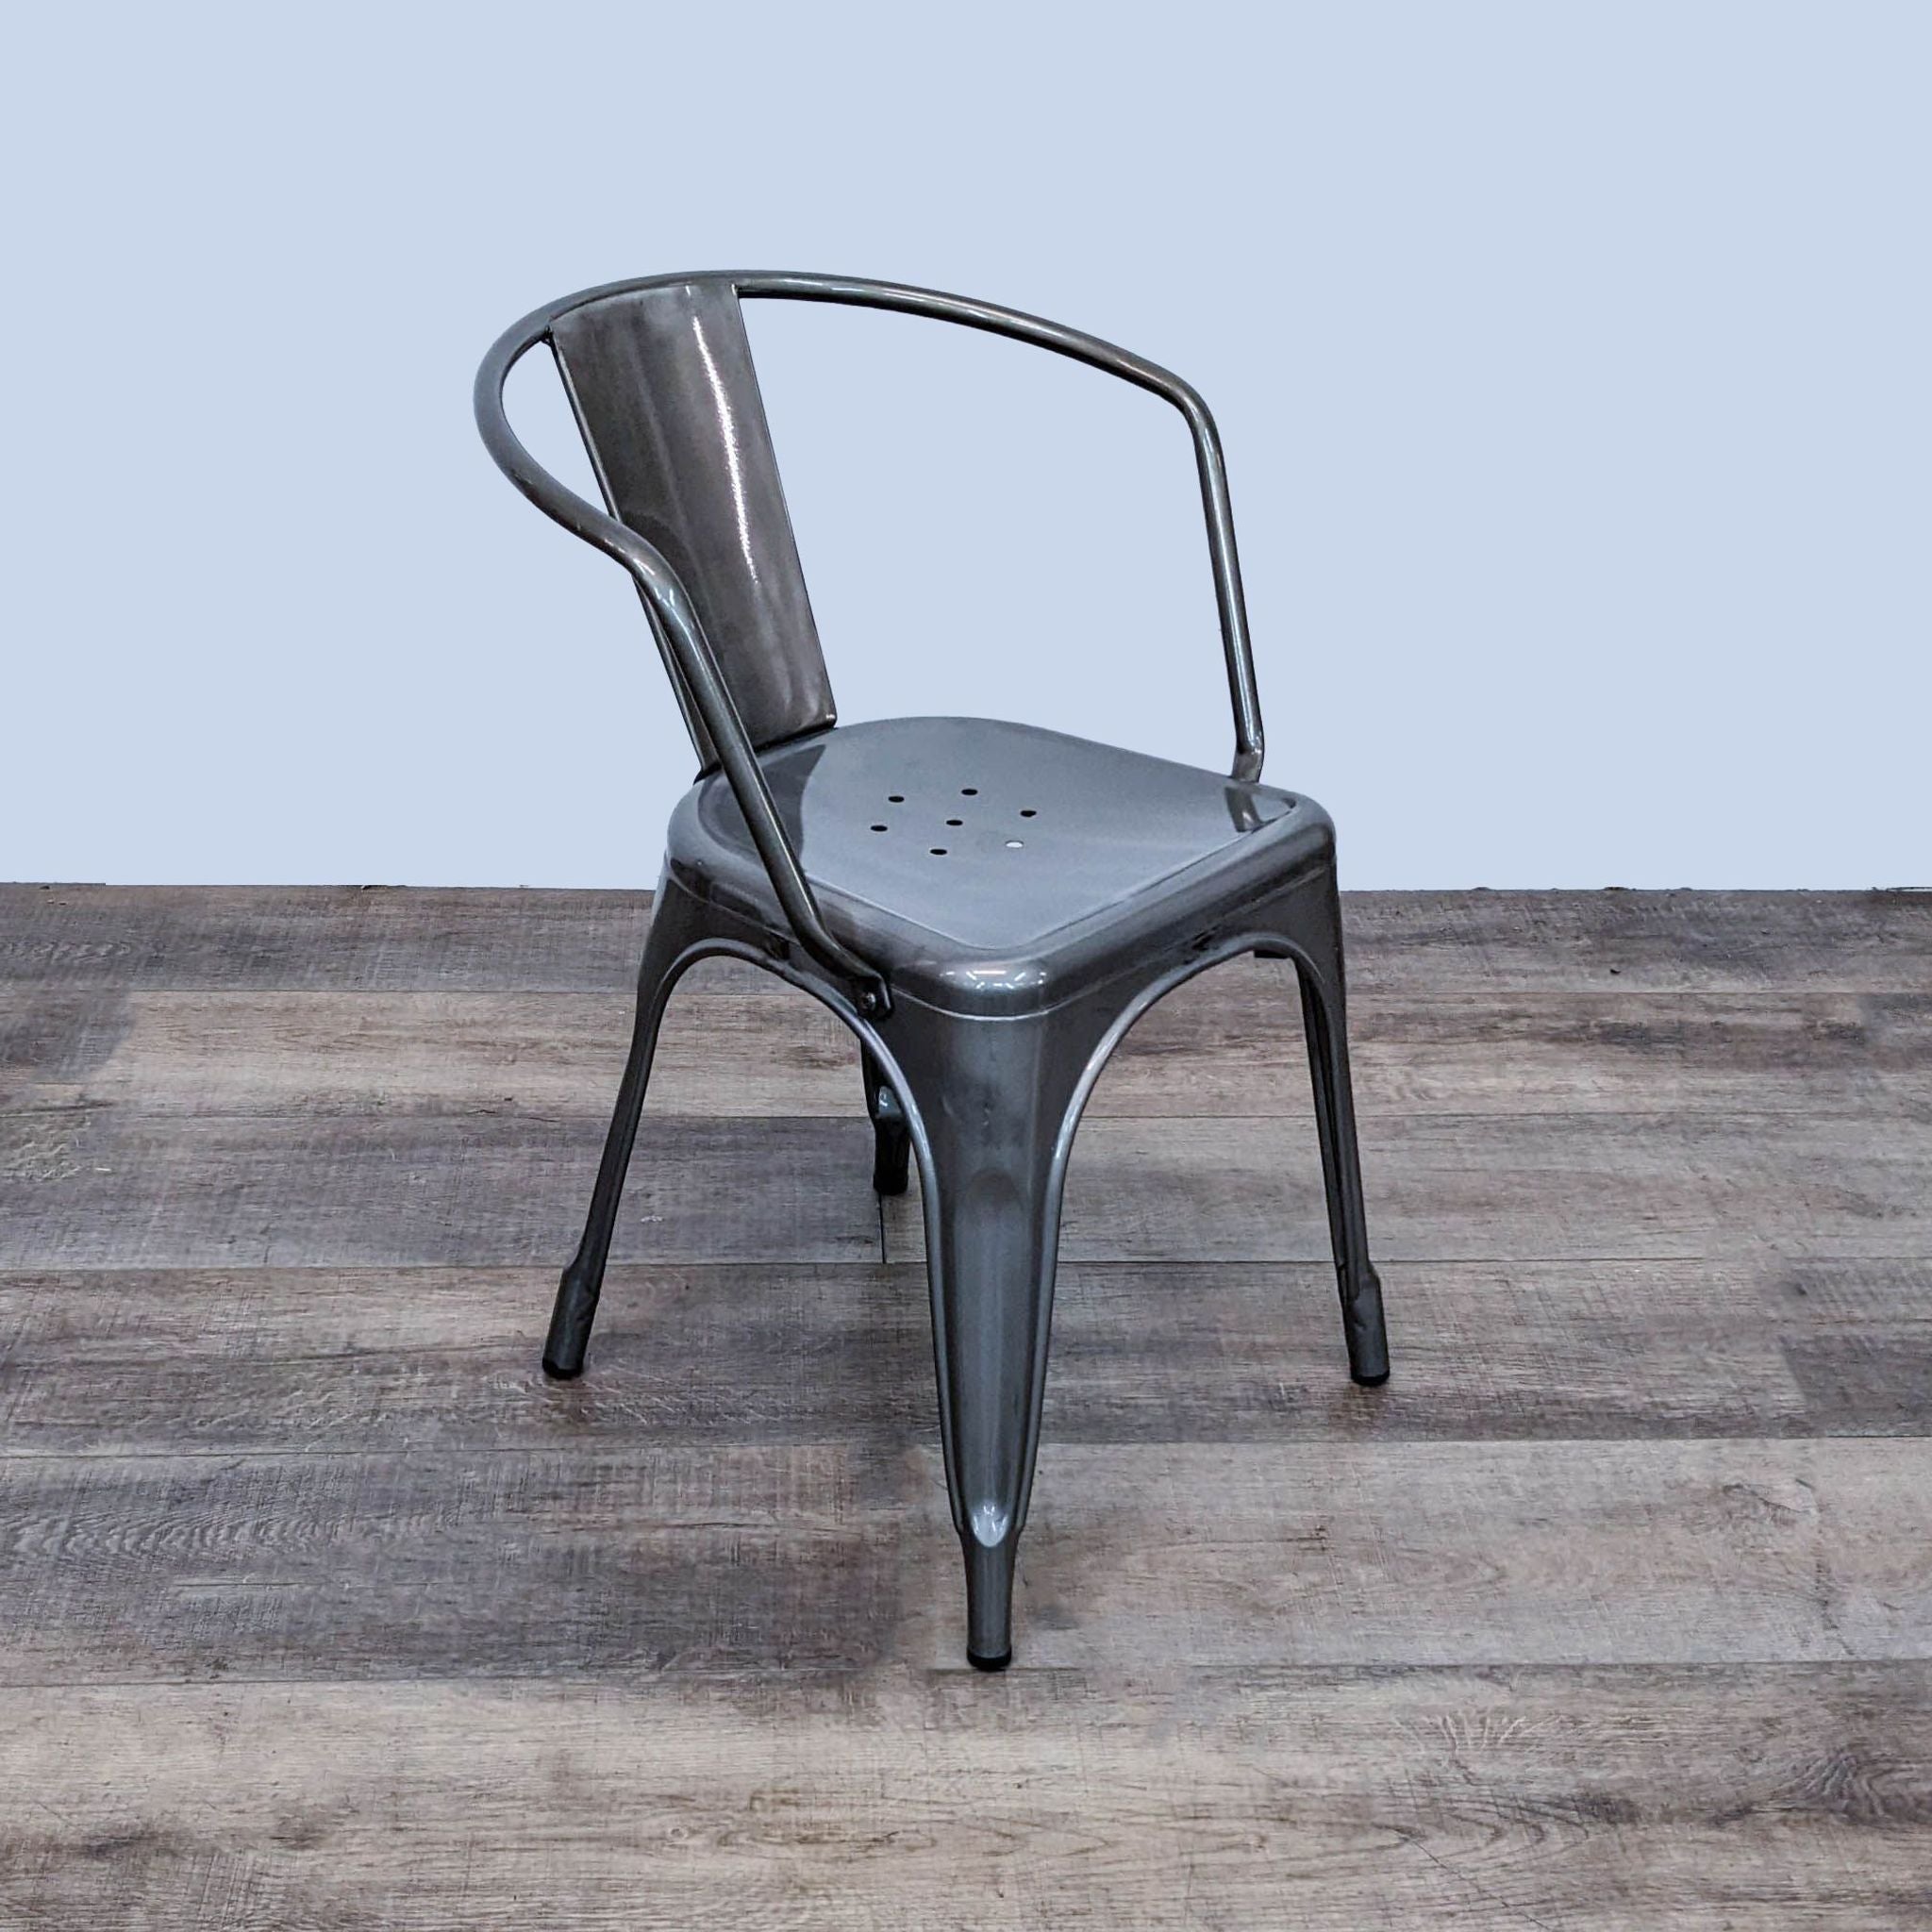 Reperch industrial metal dining chair with a curved single slat back, ergonomic design, and stackable structure on a wooden floor.